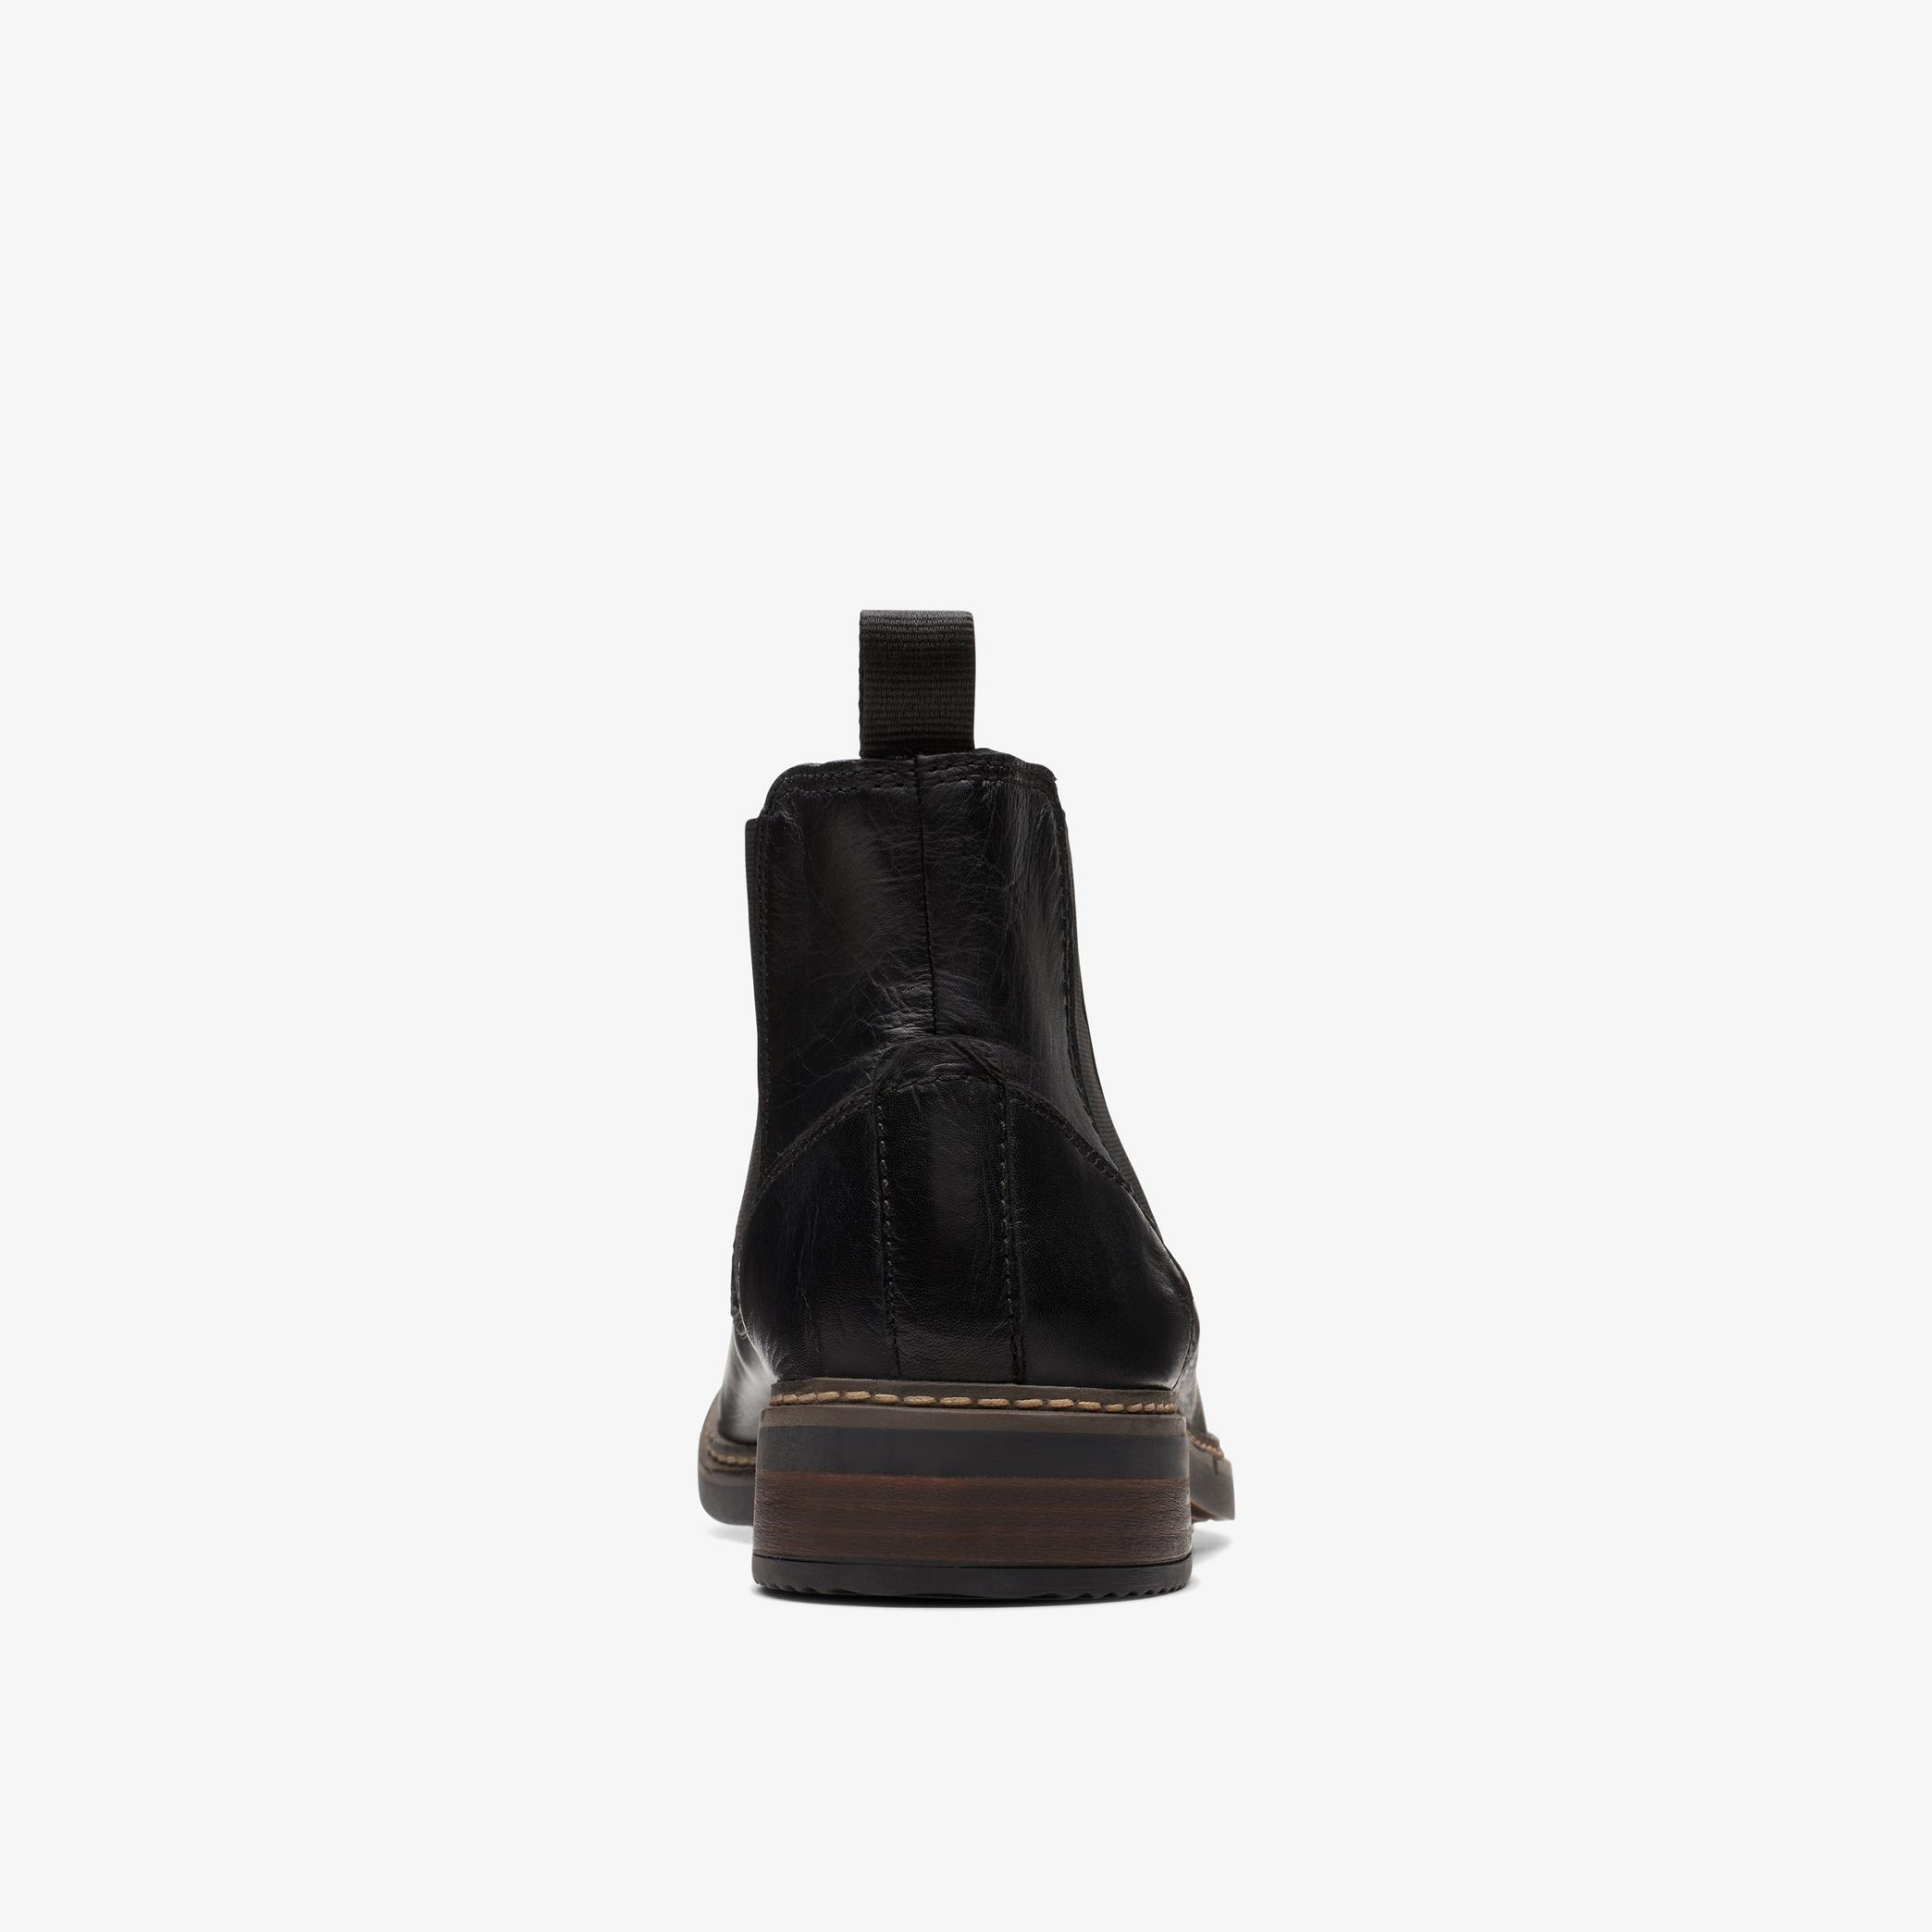 Blackford Top Black Leather Chelsea Boots, view 5 of 6